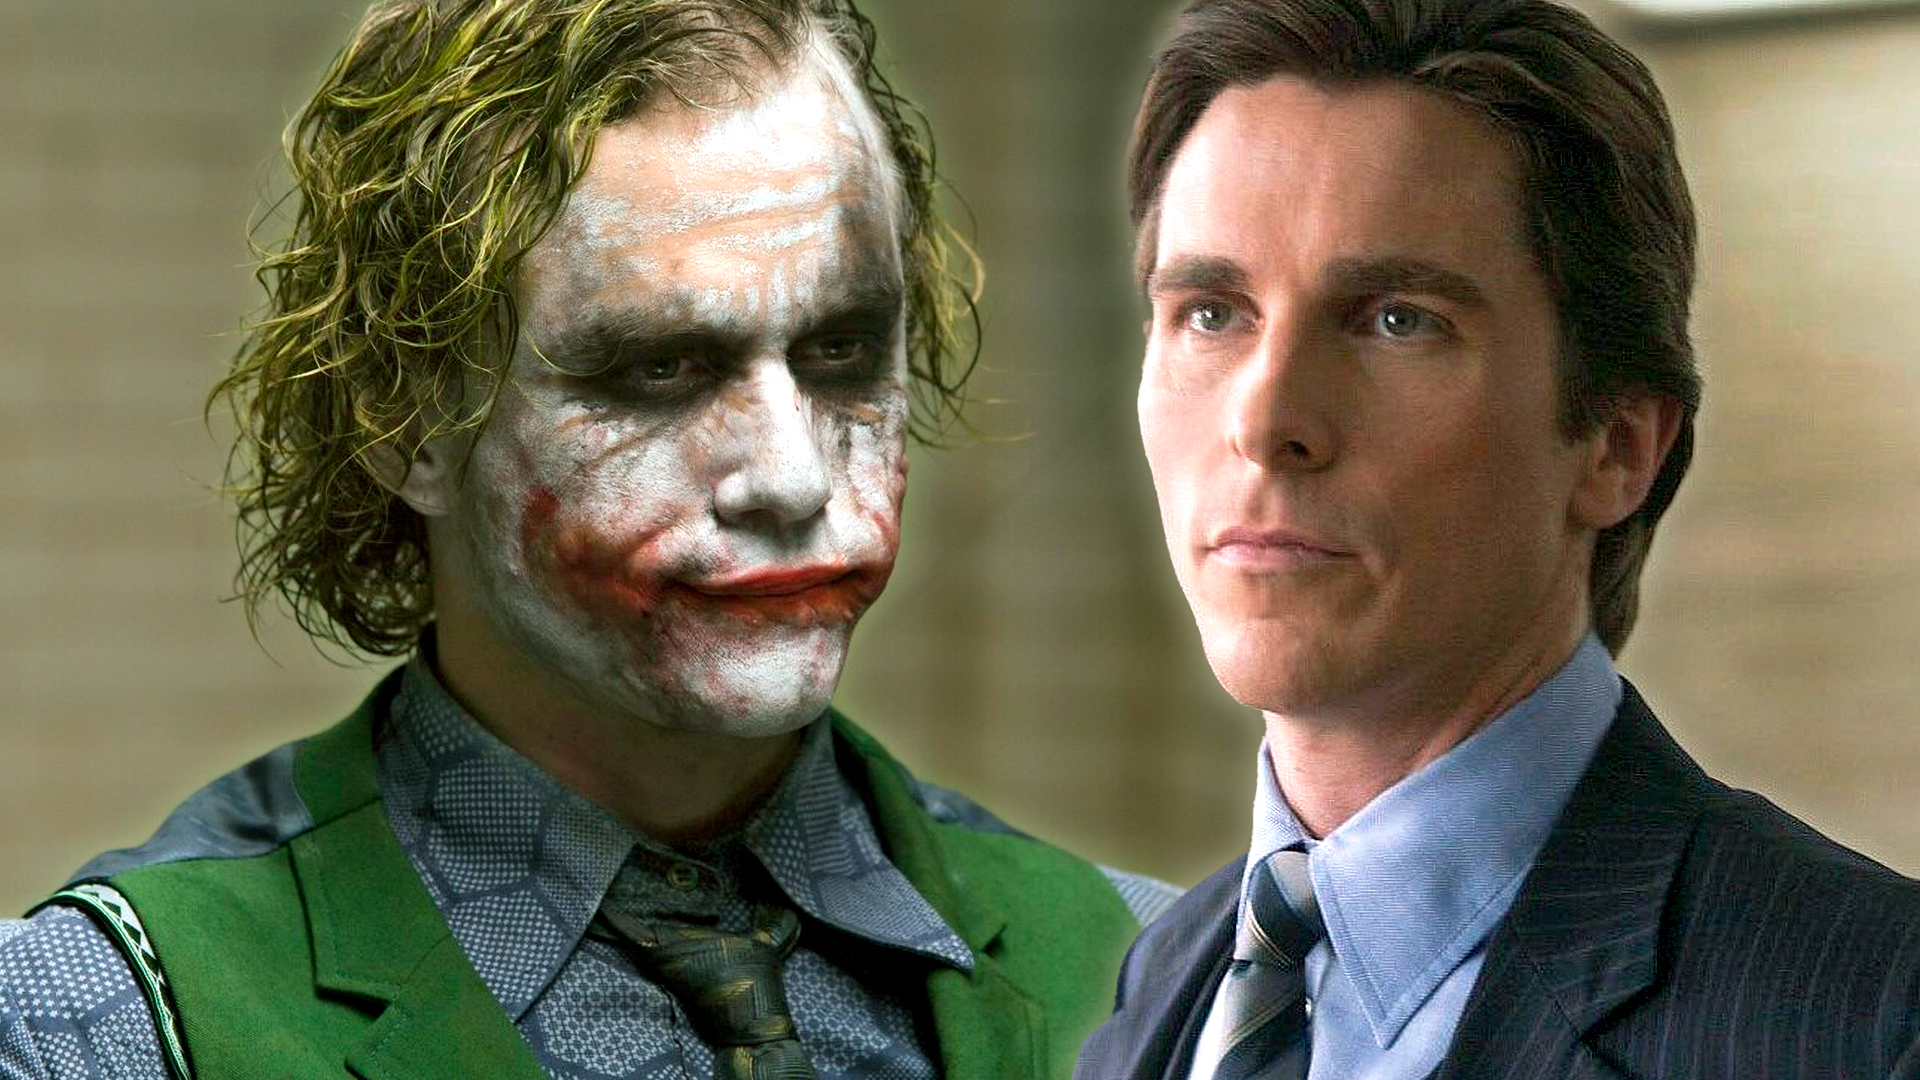 The Dark Knight Star Christian Bale Felt He Was 'Dull' Compared to ...